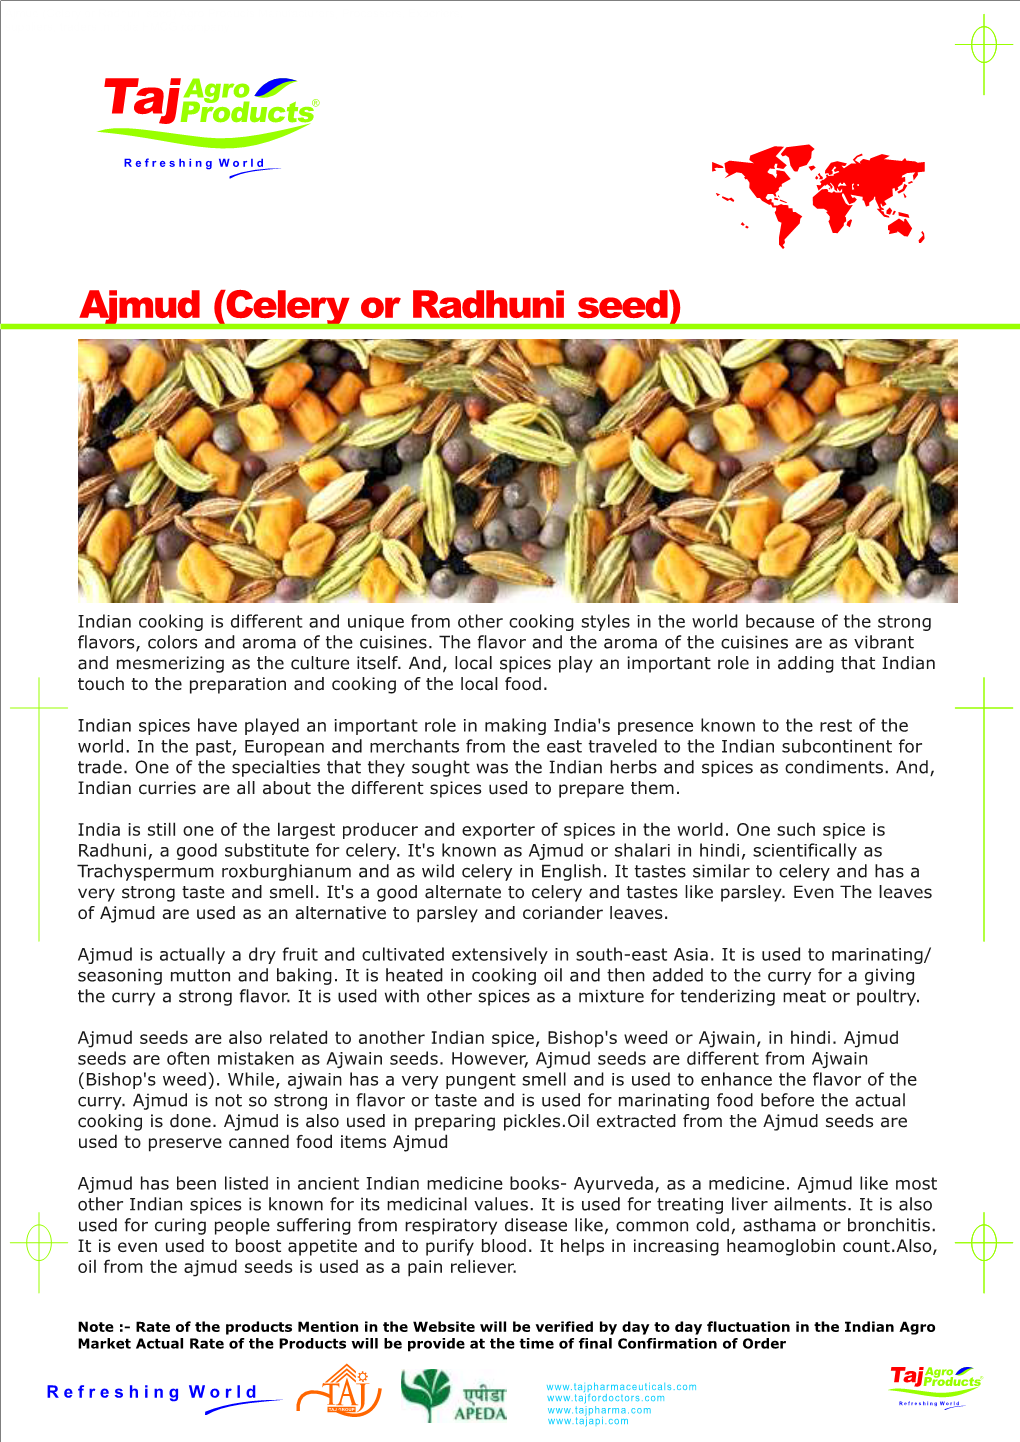 Ajmud (Celery Or Radhuni Seed) Agro Products Manufacturers, Processors, Exporters, Suppliers, Traders in India FMCG Company Taj Agro Products®